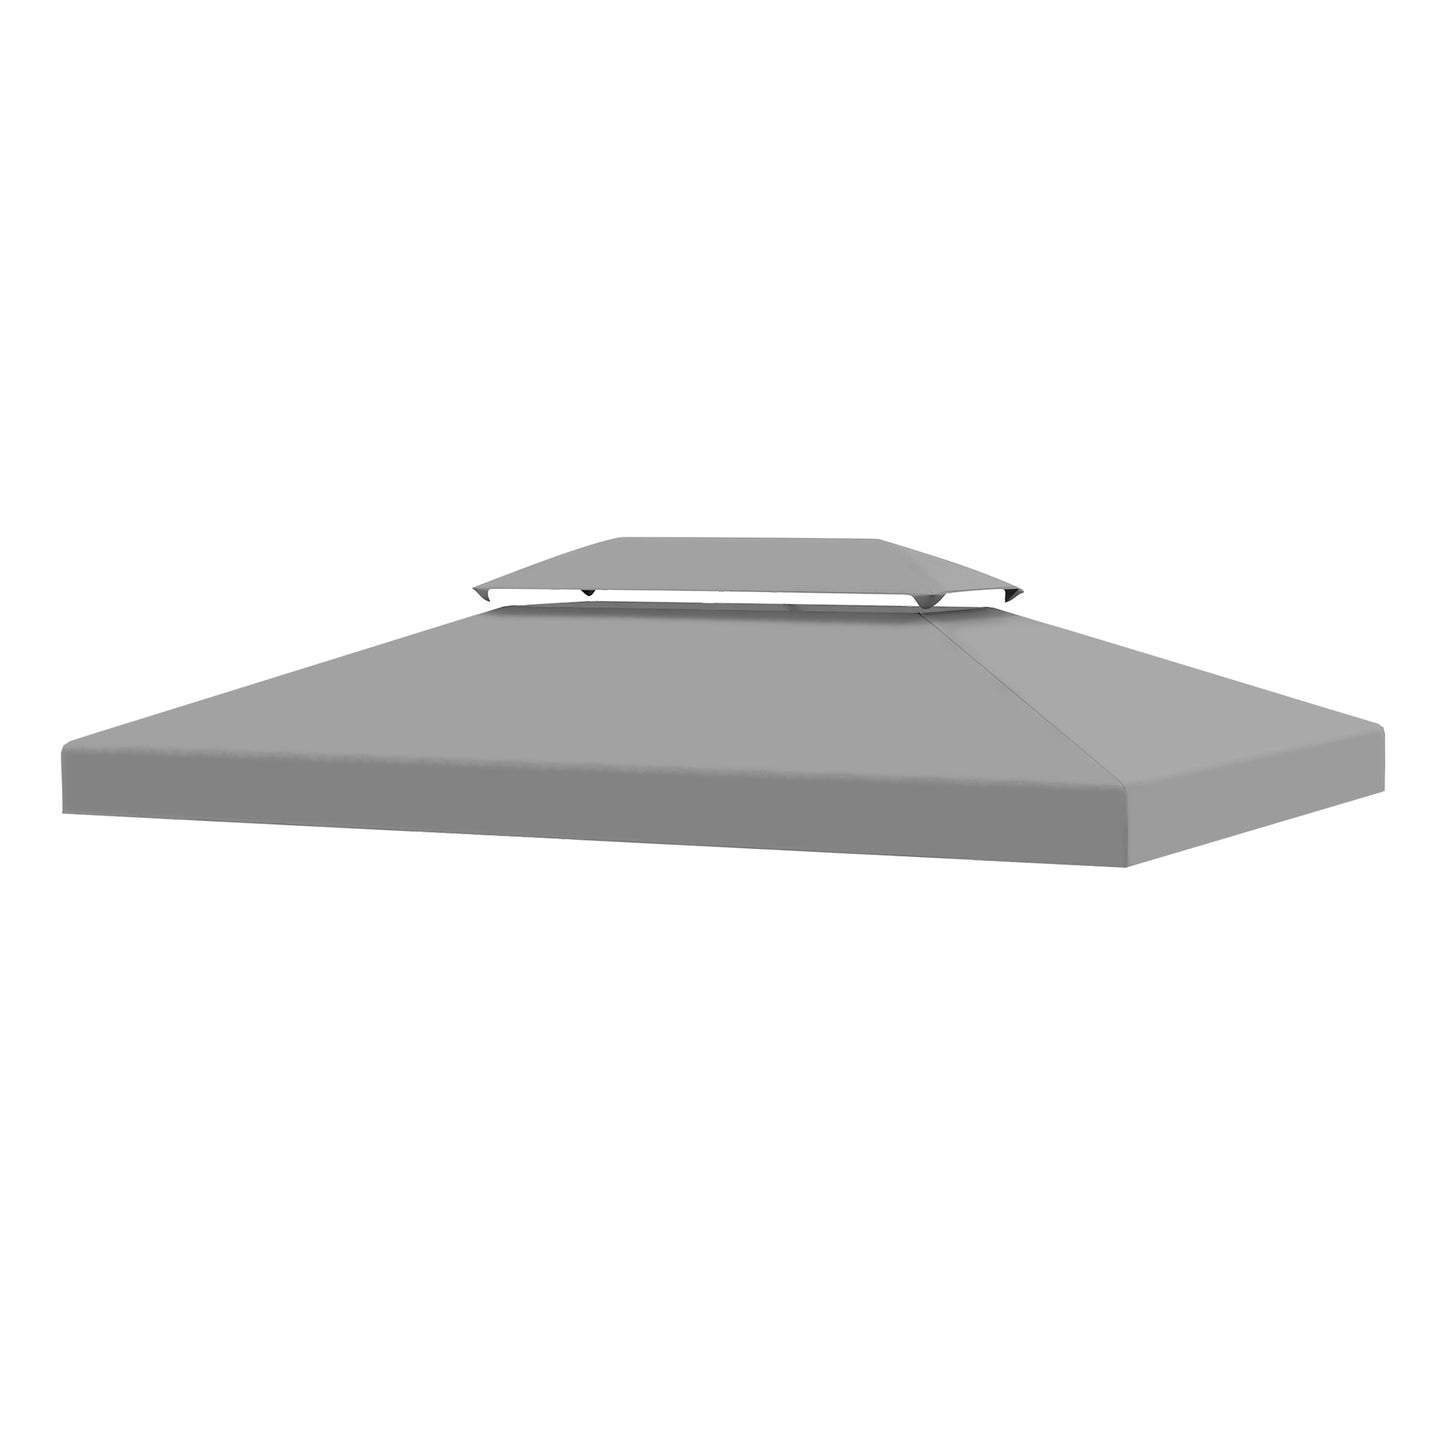 Outsunny 3x4m Gazebo Replacement Roof Canopy 2 Tier Top UV Cover Garden Patio Light Grey